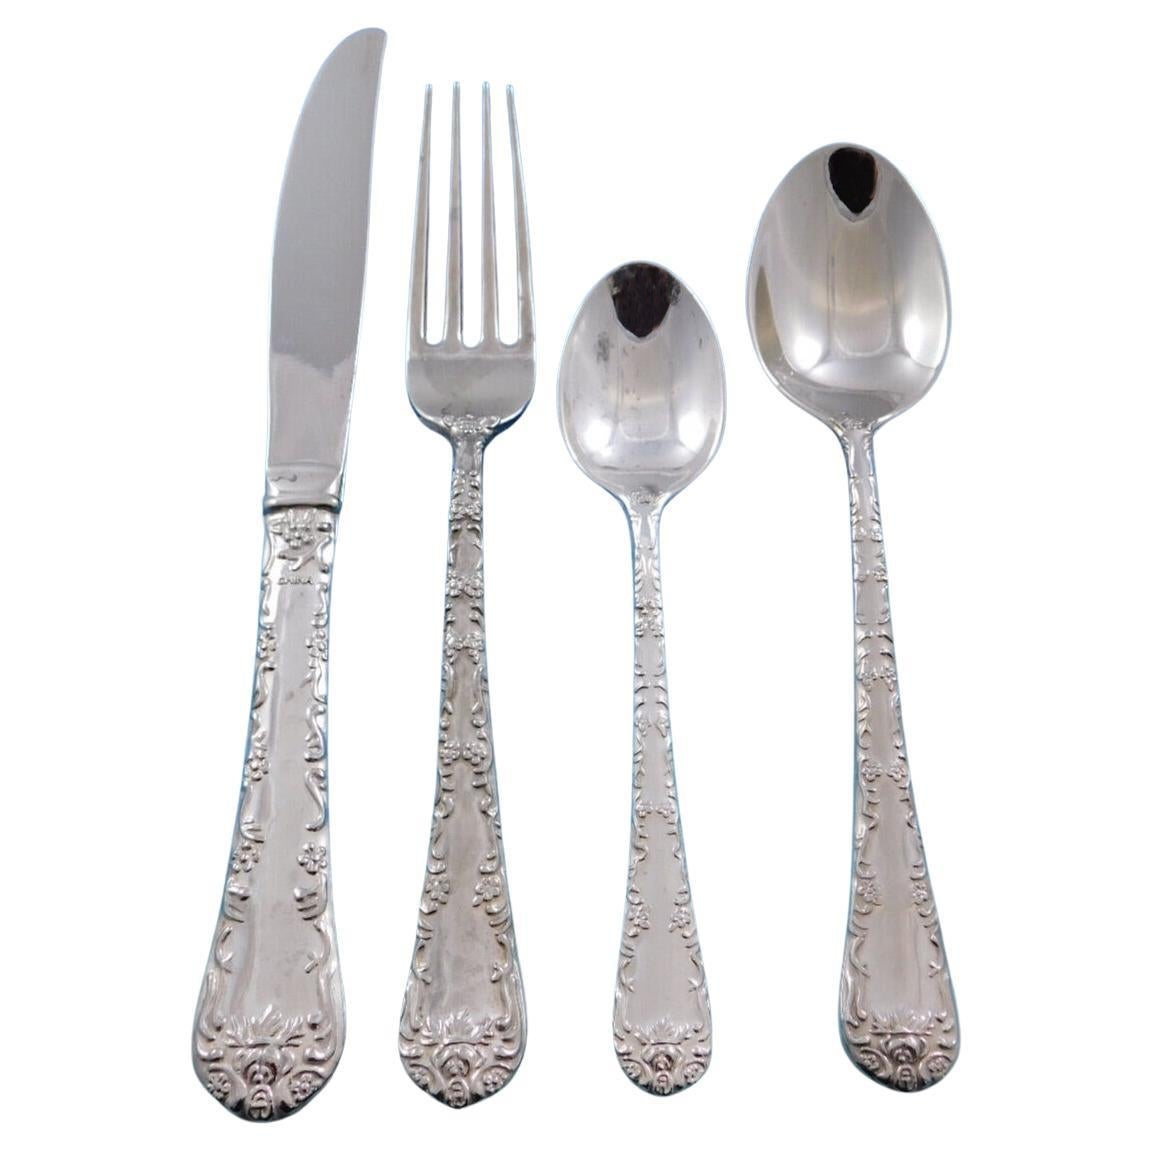 Floral Silverplate Flatware Silverware Service Set Heavy Made in China